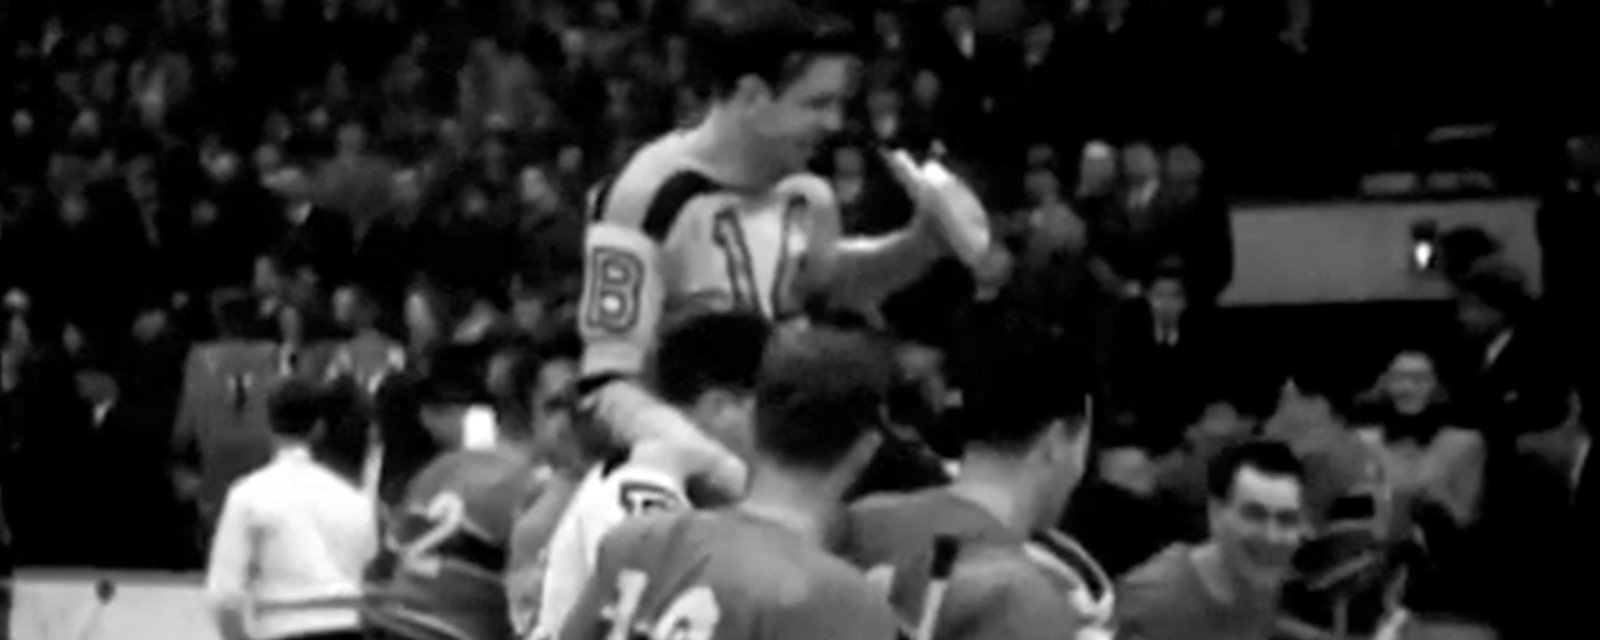 Throwback: Habs carry Bruins players off the ice on their shoulders prior to WWII deployment